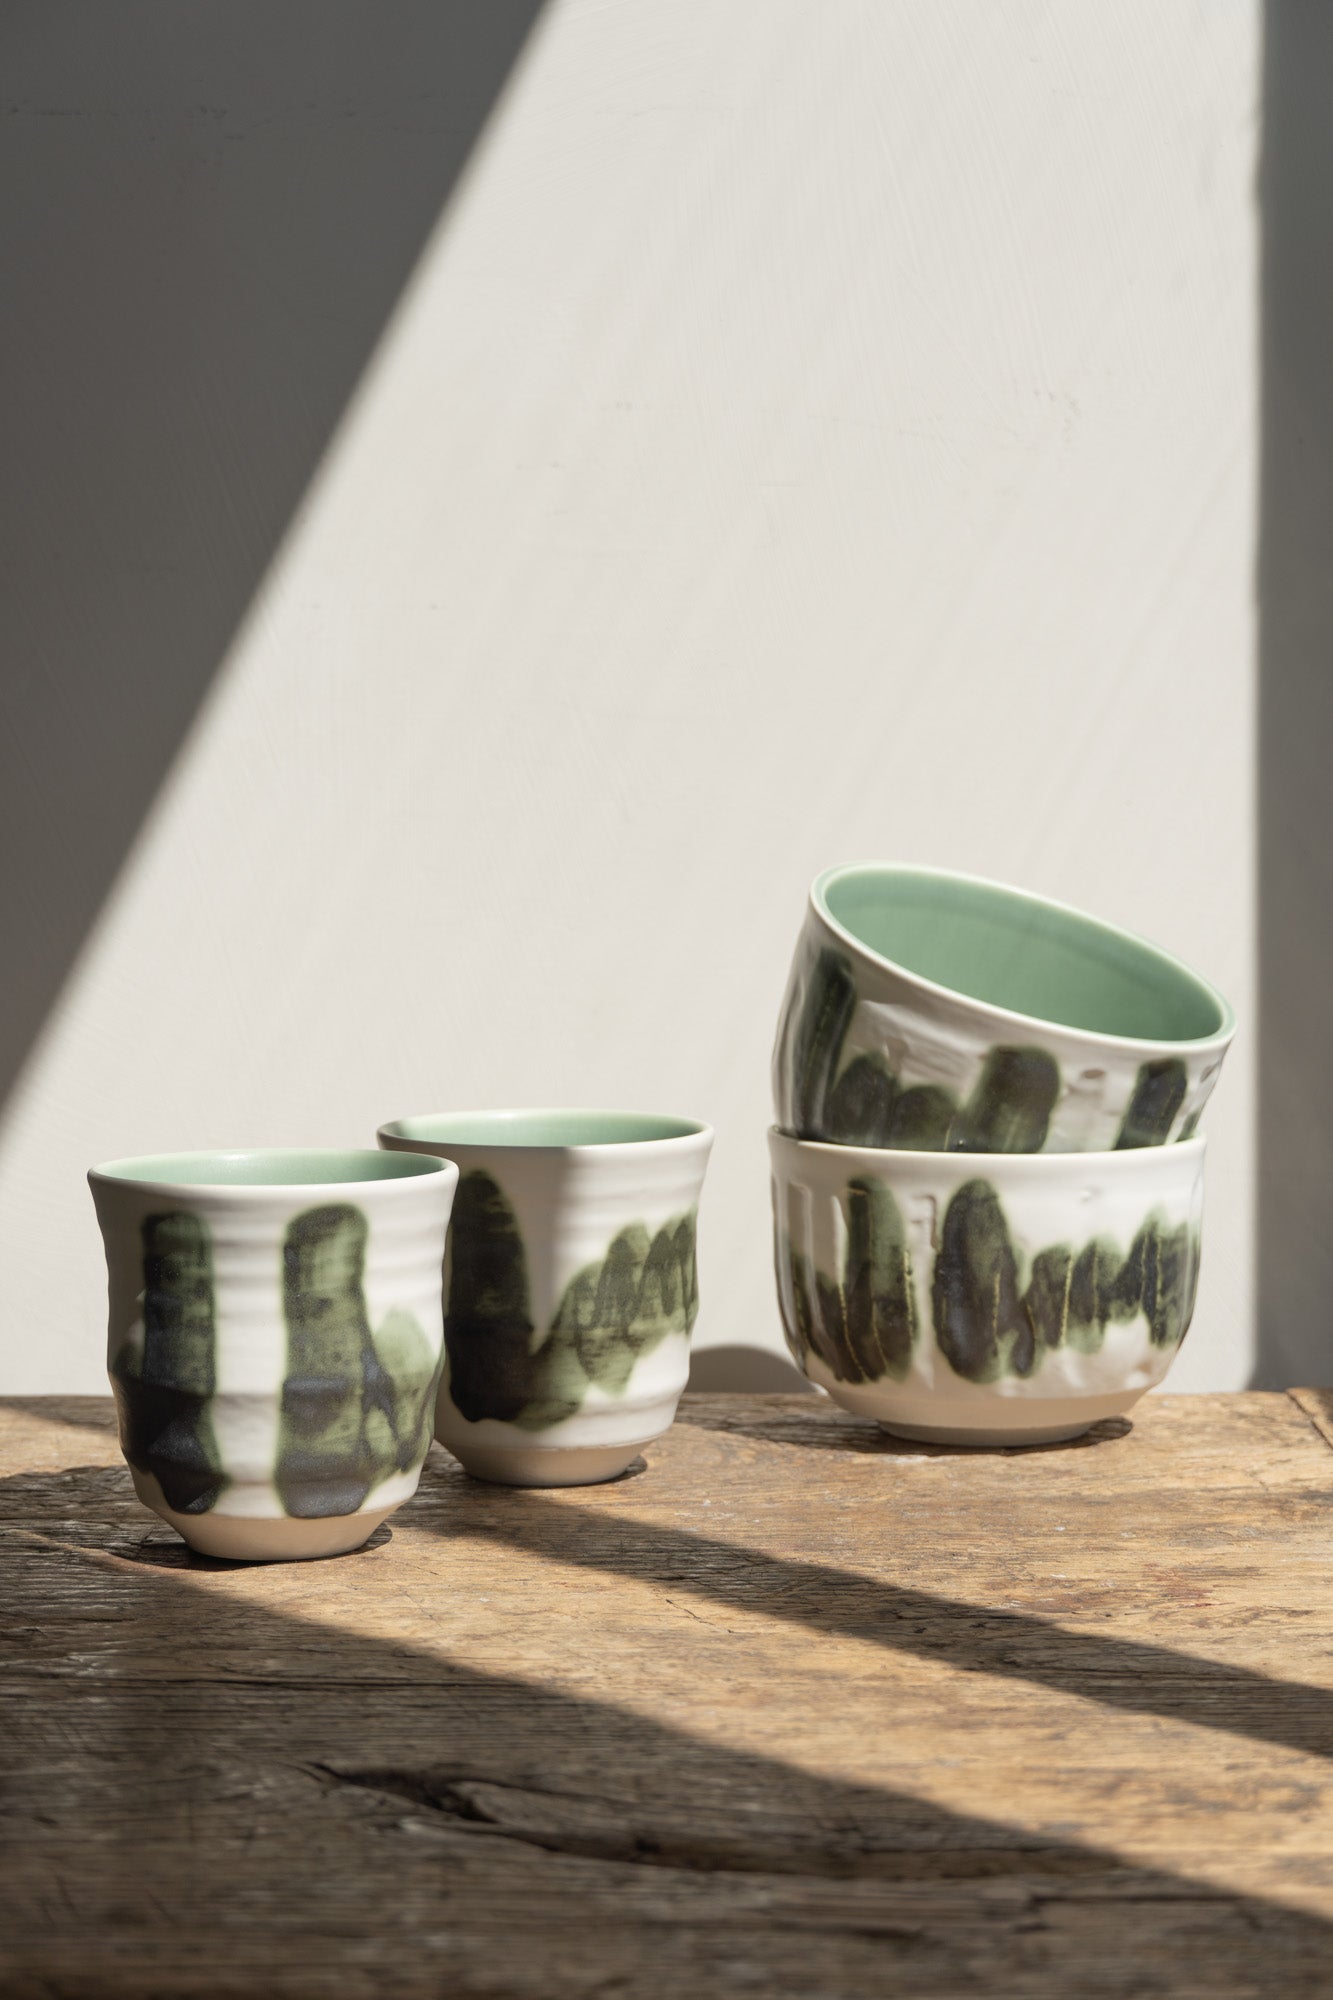 Dashi Bowl & Cup Green family by Jars Ceramistes.